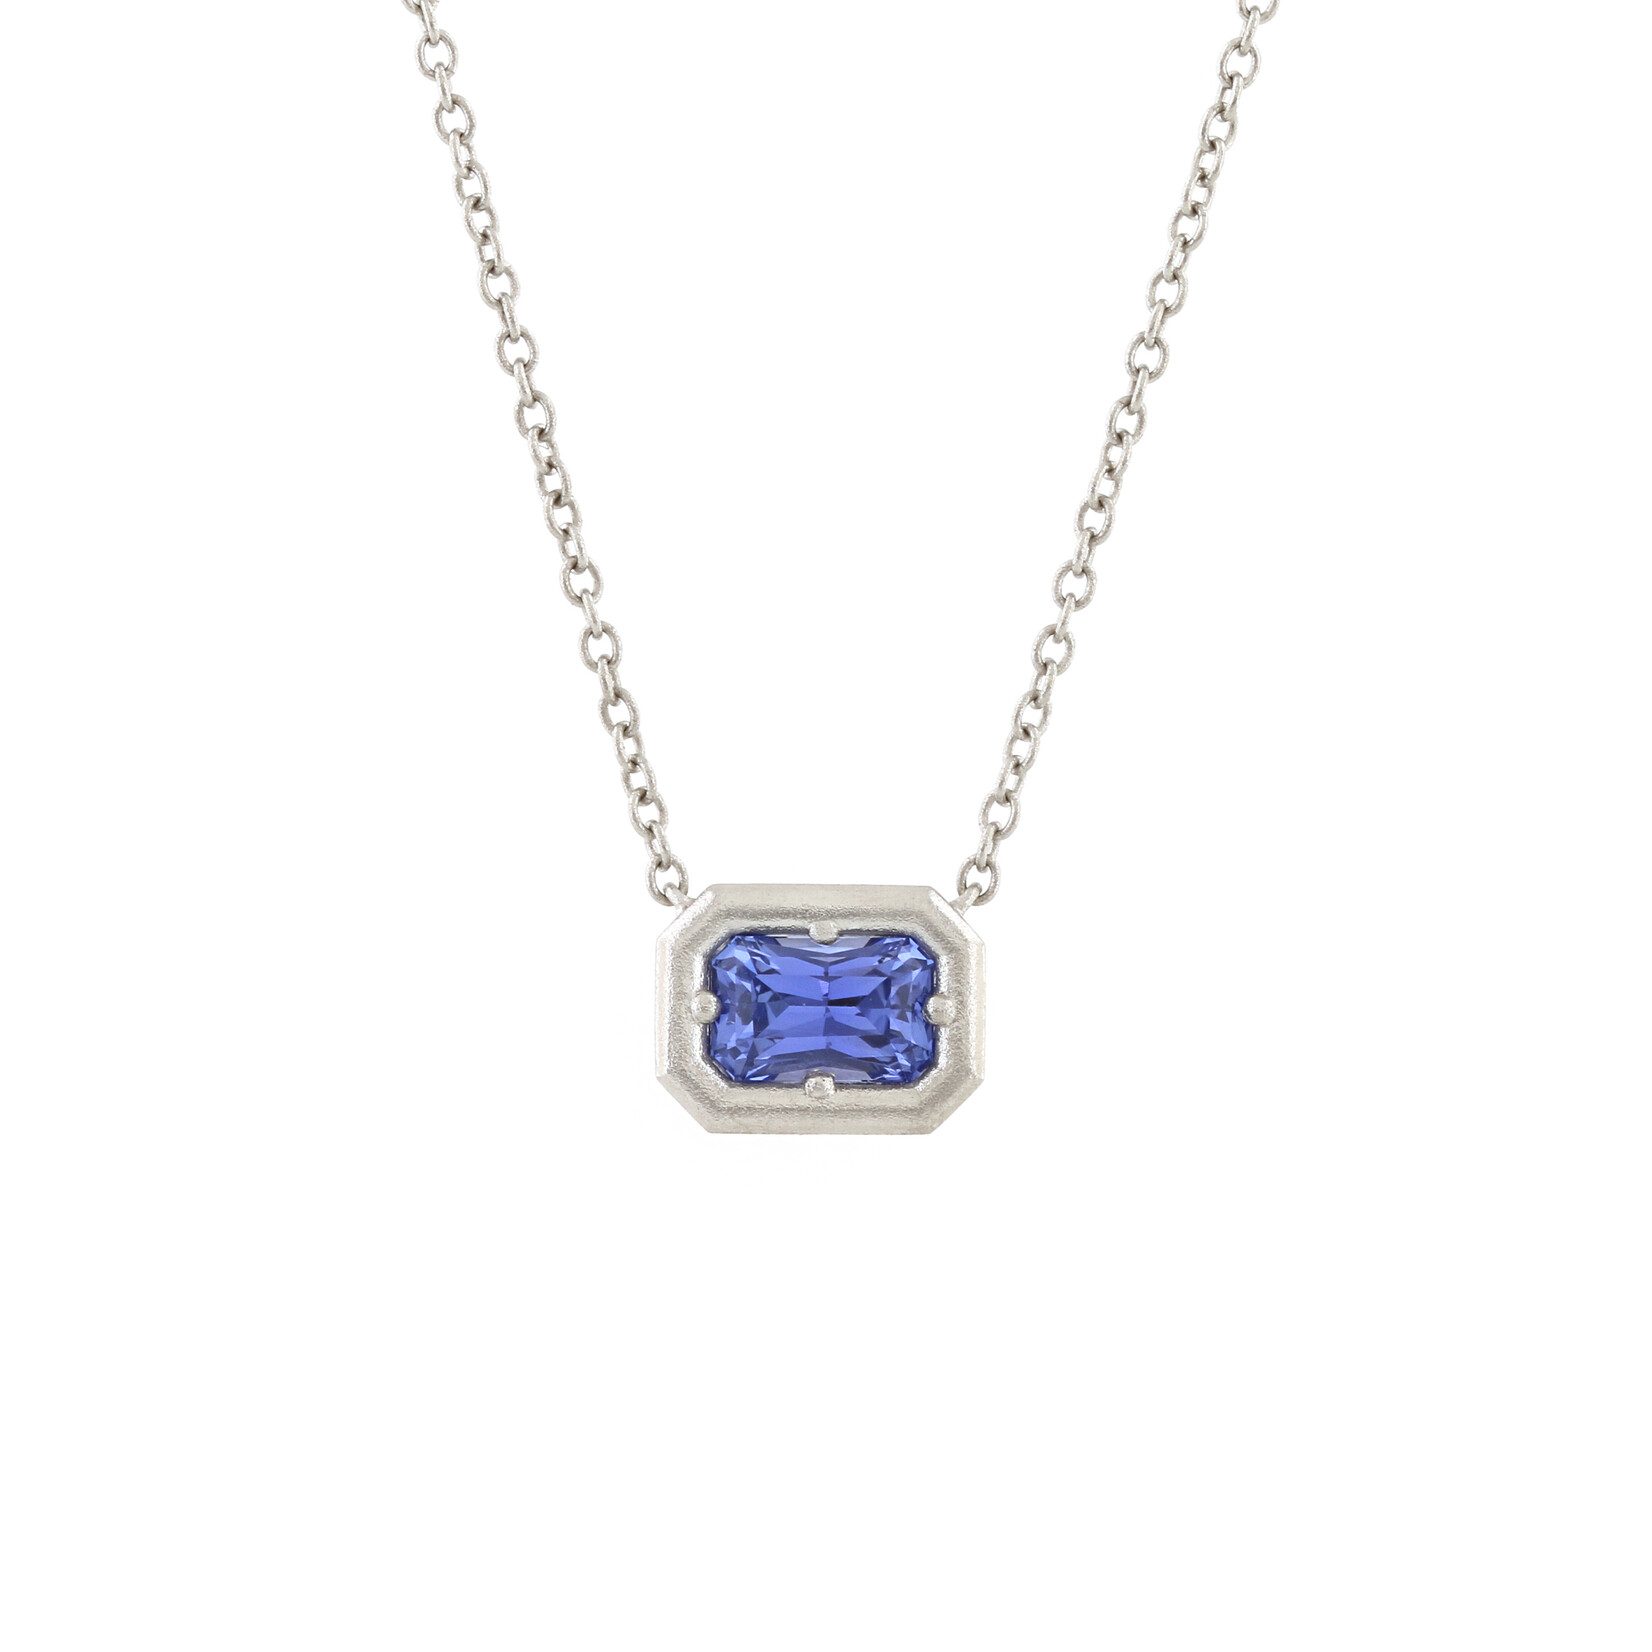 Baxter Moerman Anika Necklace with Violet Sapphire